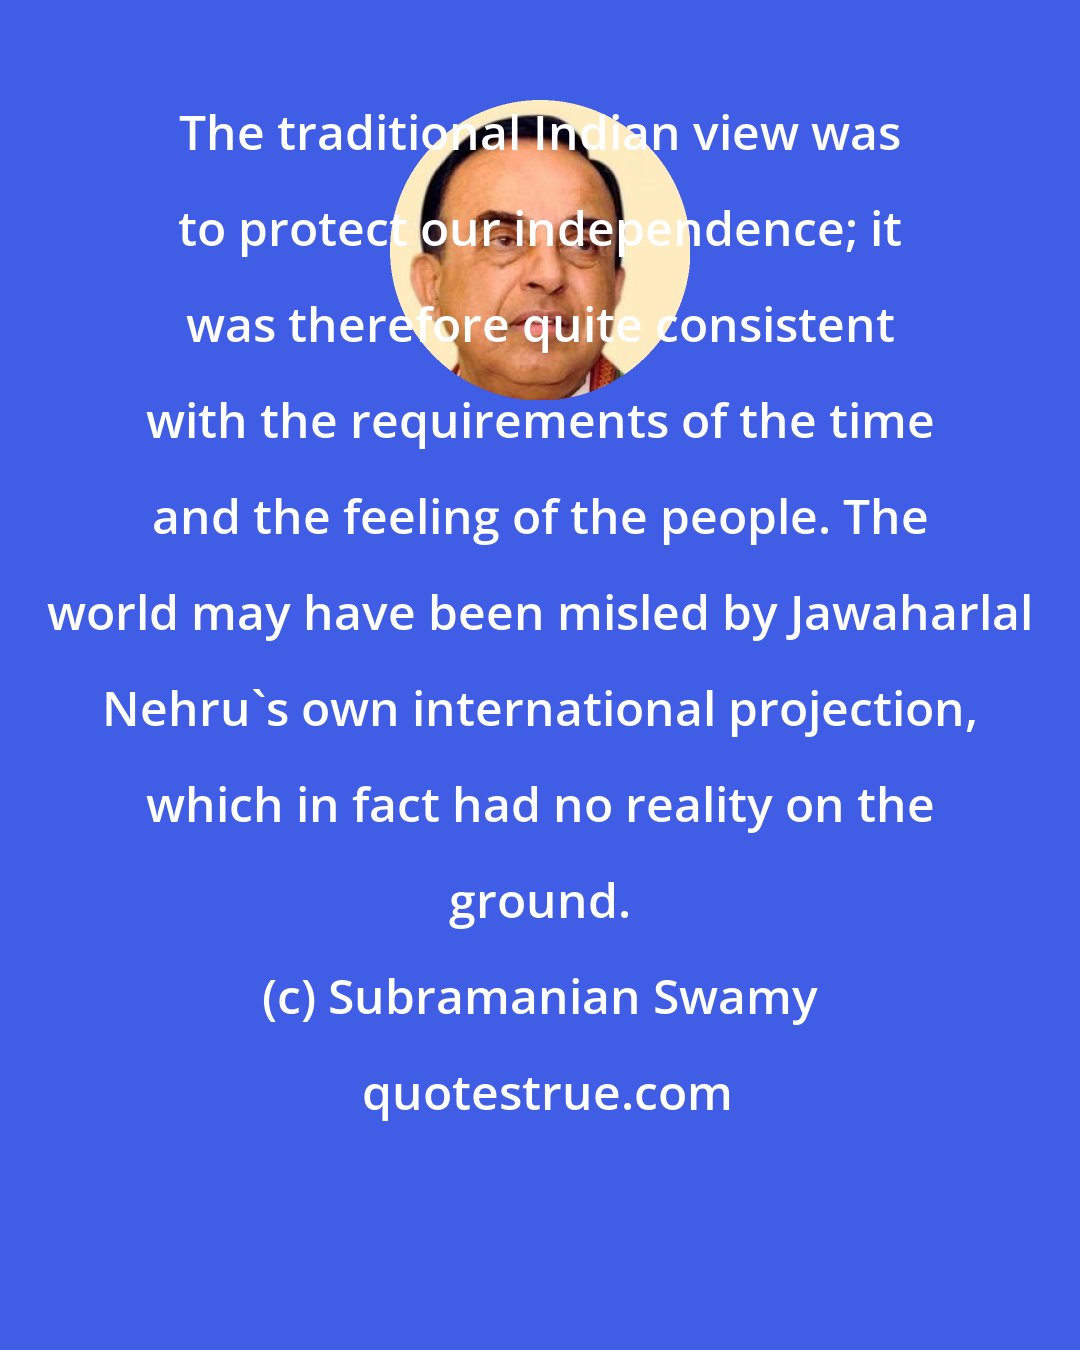 Subramanian Swamy: The traditional Indian view was to protect our independence; it was therefore quite consistent with the requirements of the time and the feeling of the people. The world may have been misled by Jawaharlal Nehru's own international projection, which in fact had no reality on the ground.